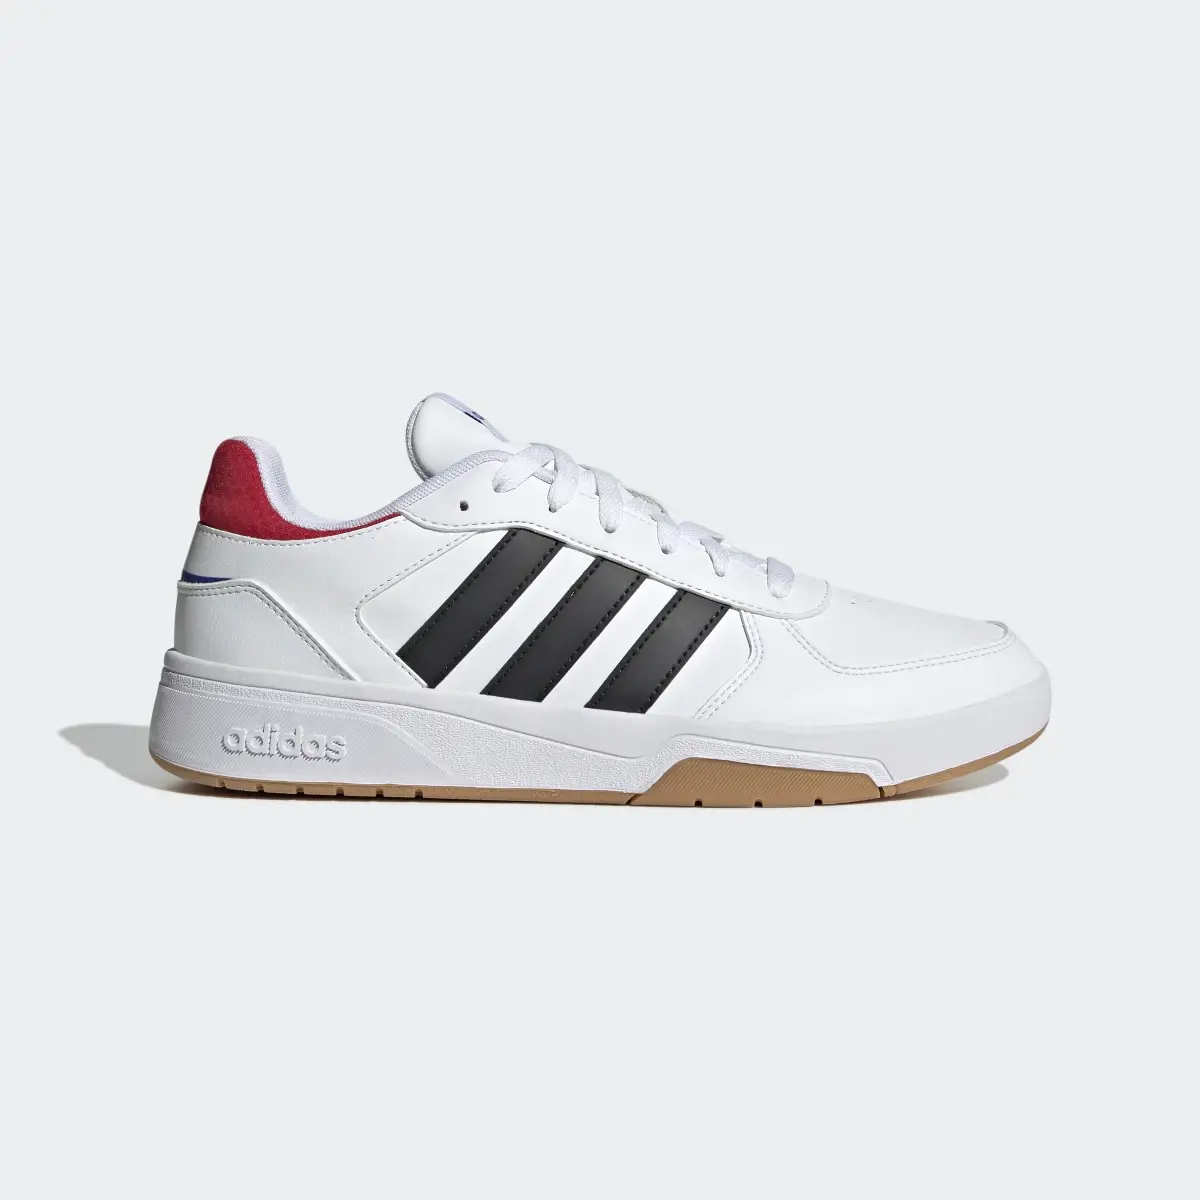 Adidas Chaussure CourtBeat Court Lifestyle. 2